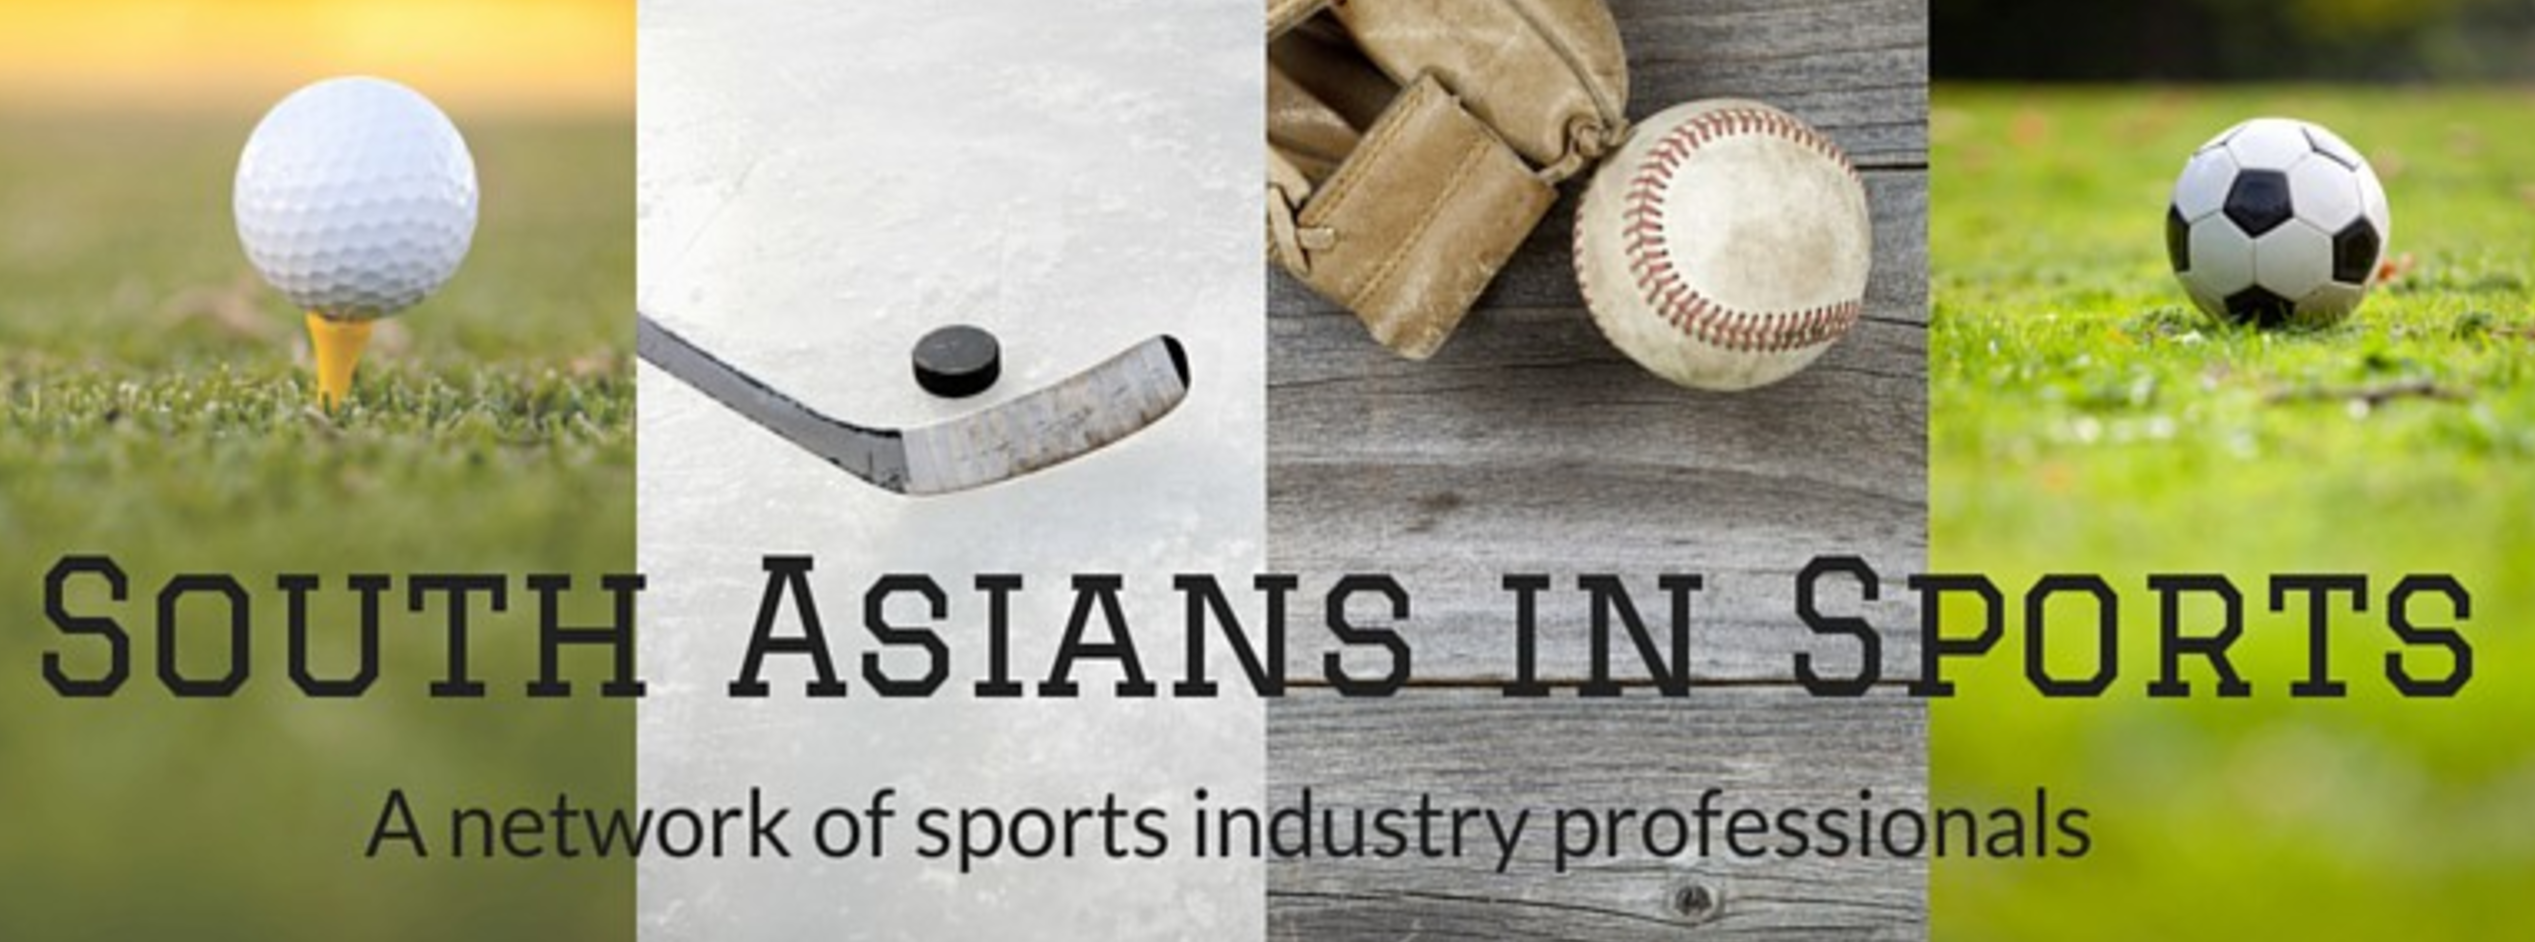 South Asians in Sports to host panel in New York